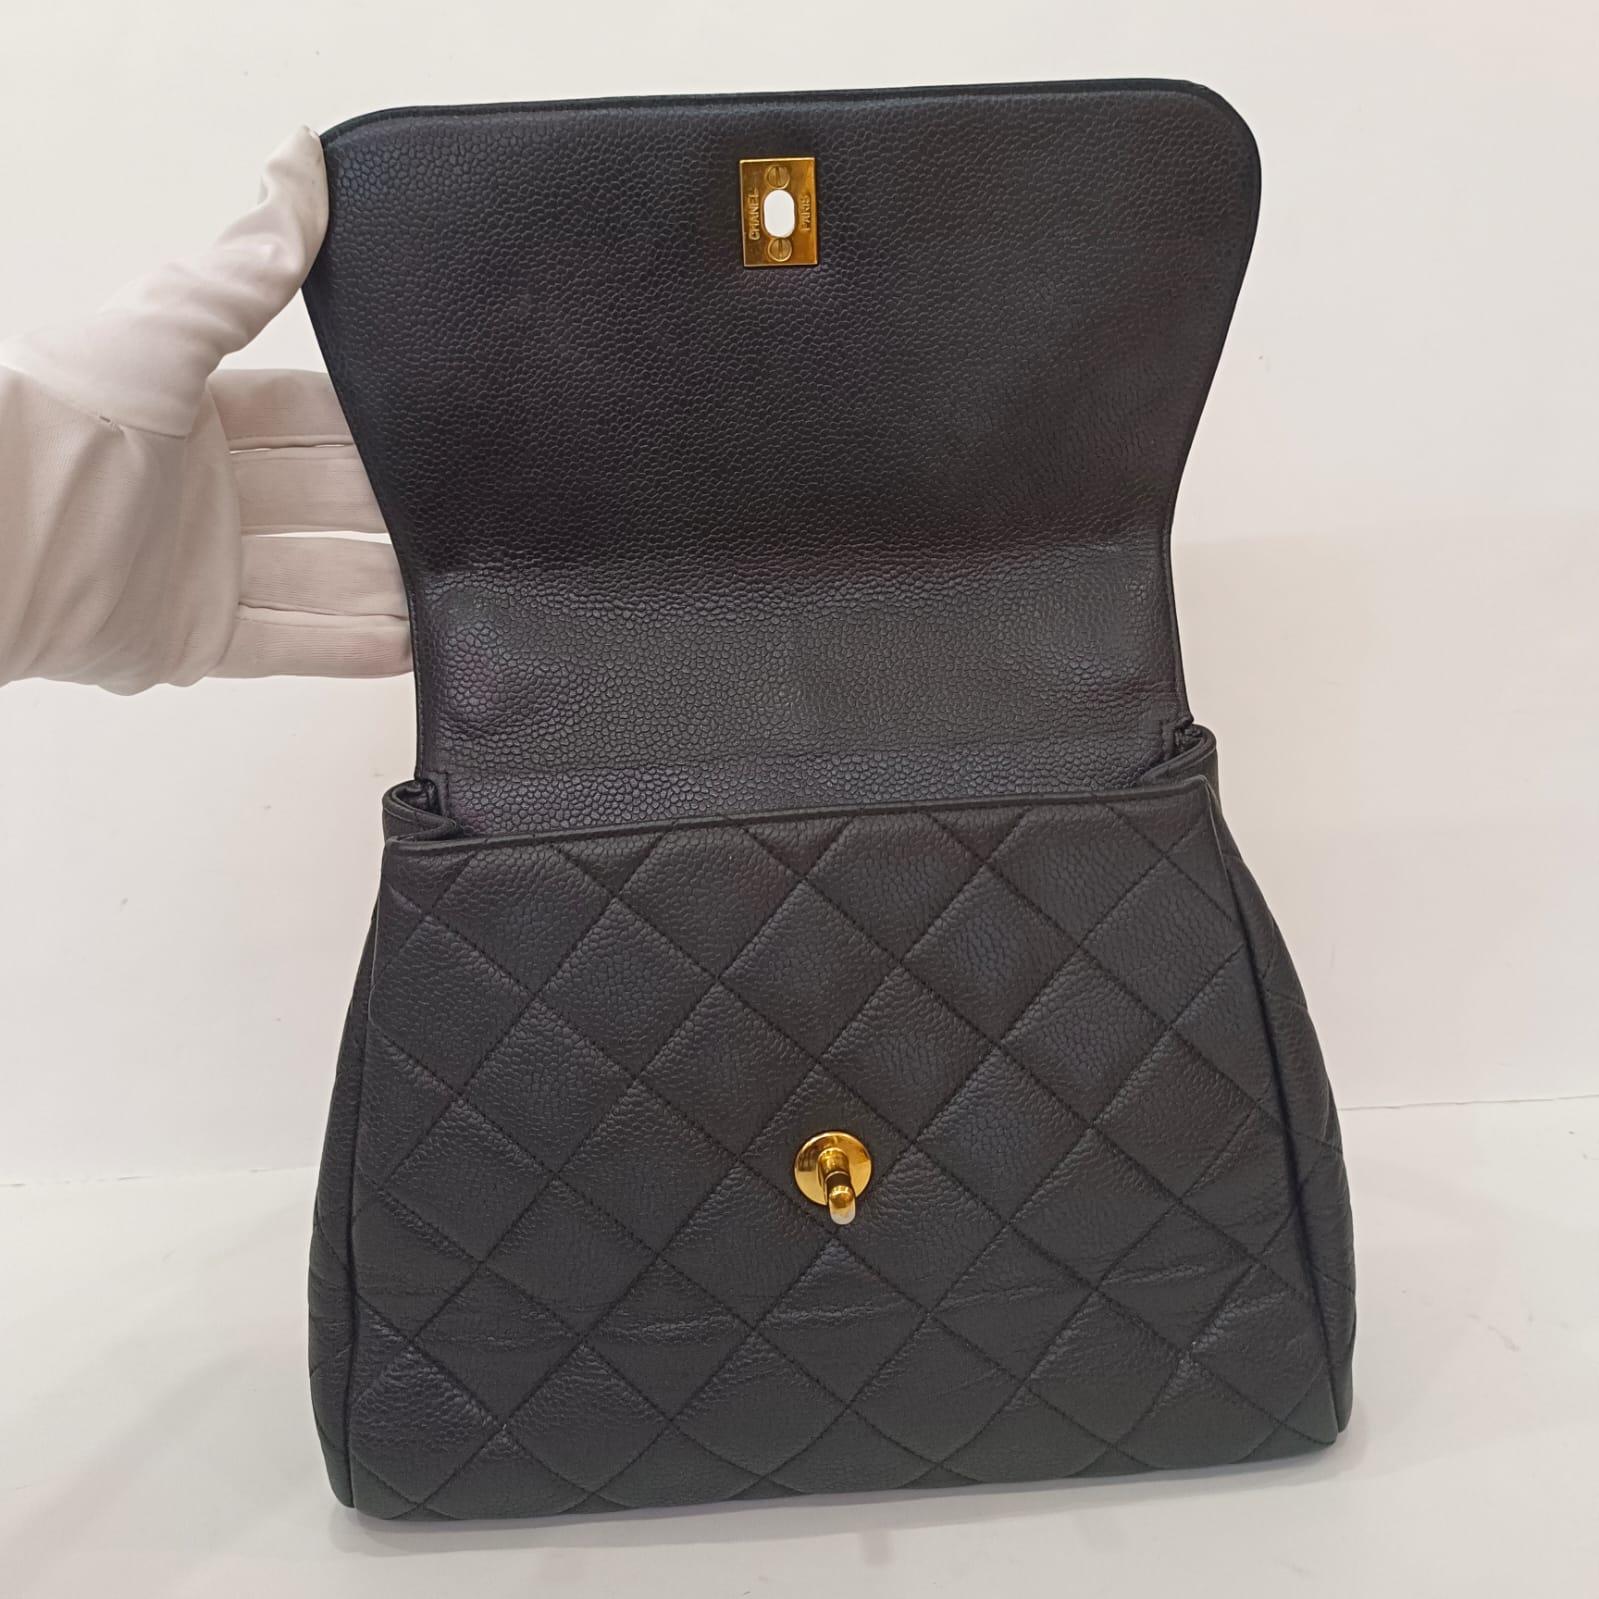 Vintage Chanel Black Caviar Quilted Top Handle Flap Bag For Sale 4